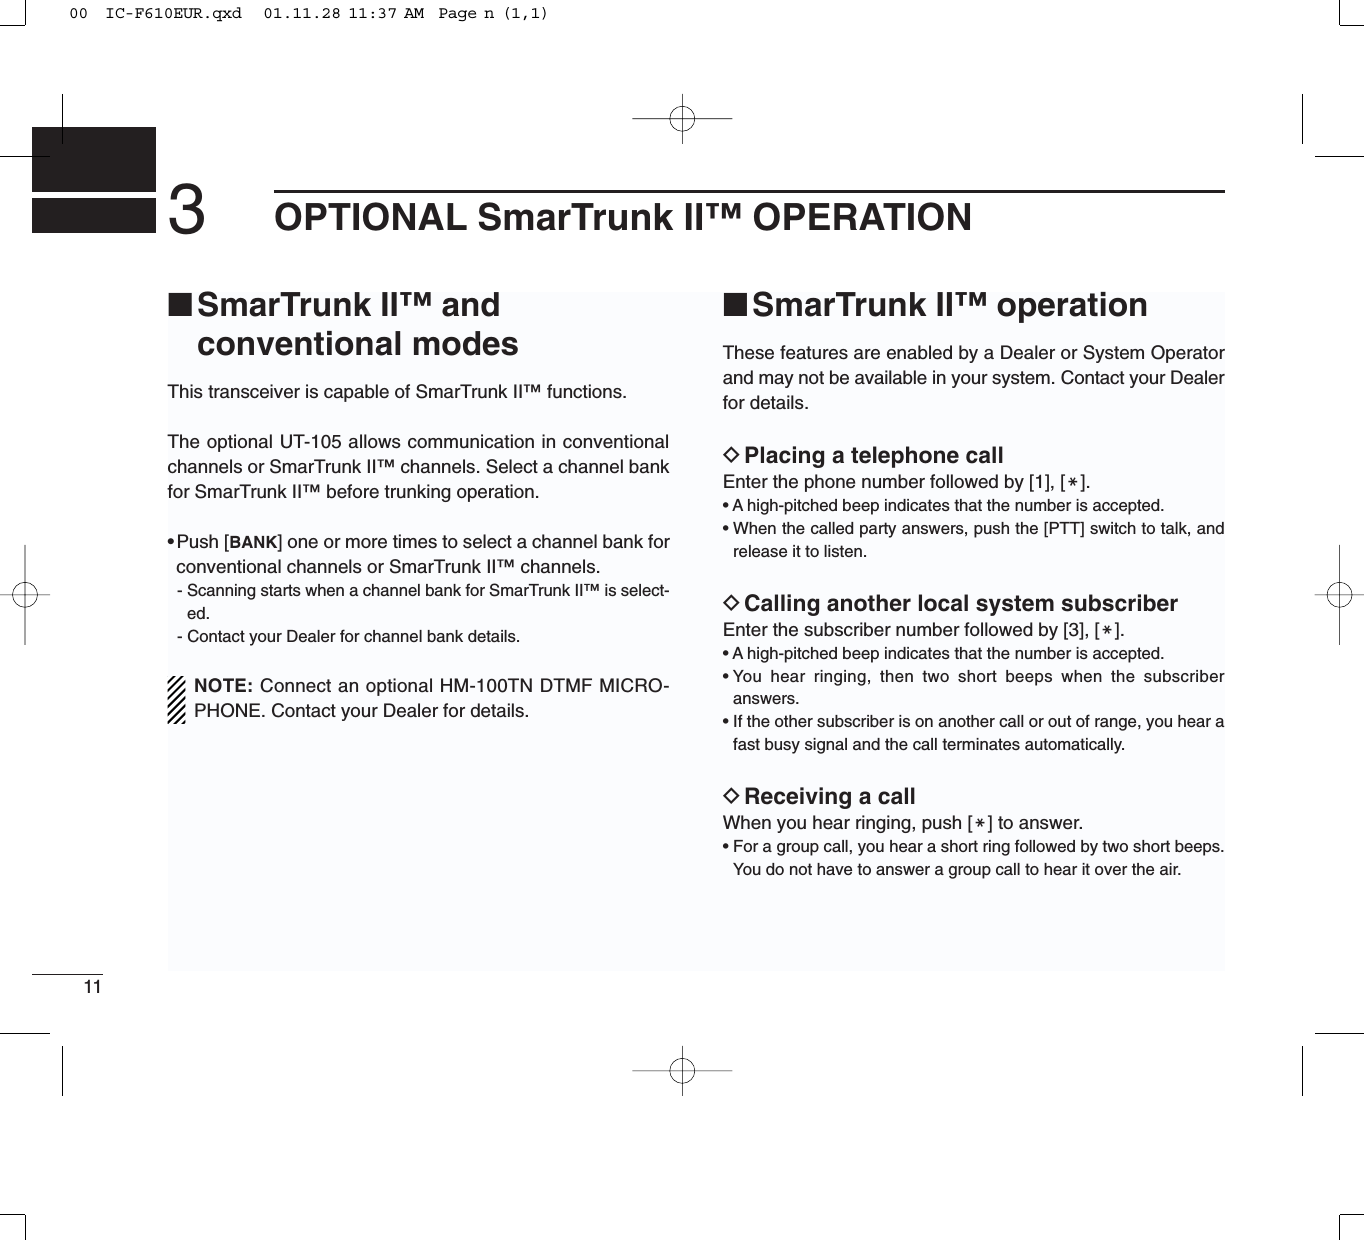 113OPTIONAL SmarTrunk II™ OPERATION■SmarTrunk II™ and conventional modesThis transceiver is capable of SmarTrunk II™functions.The optional UT-105 allows communication in conventionalchannels or SmarTrunk II™channels. Select a channel bankfor SmarTrunk II™before trunking operation.•Push [BANK] one or more times to select a channel bank forconventional channels or SmarTrunk II™channels.- Scanning starts when a channel bank for SmarTrunk II™is select-ed.- Contact your Dealer for channel bank details.NOTE: Connect an optional HM-100TN DTMF MICRO-PHONE. Contact your Dealer for details.■SmarTrunk II™ operationThese features are enabled by a Dealer or System Operatorand may not be available in your system. Contact your Dealerfor details.DPlacing a telephone callEnter the phone number followed by [1], [M].• A high-pitched beep indicates that the number is accepted.• When the called party answers, push the [PTT] switch to talk, andrelease it to listen.DCalling another local system subscriberEnter the subscriber number followed by [3], [M].• A high-pitched beep indicates that the number is accepted.• You hear ringing, then two short beeps when the subscriberanswers.• If the other subscriber is on another call or out of range, you hear afast busy signal and the call terminates automatically.DReceiving a callWhen you hear ringing, push [M] to answer.• For a group call, you hear a short ring followed by two short beeps.You do not have to answer a group call to hear it over the air.00  IC-F610EUR.qxd   01.11.28 11:37 AM  Page n (1,1)